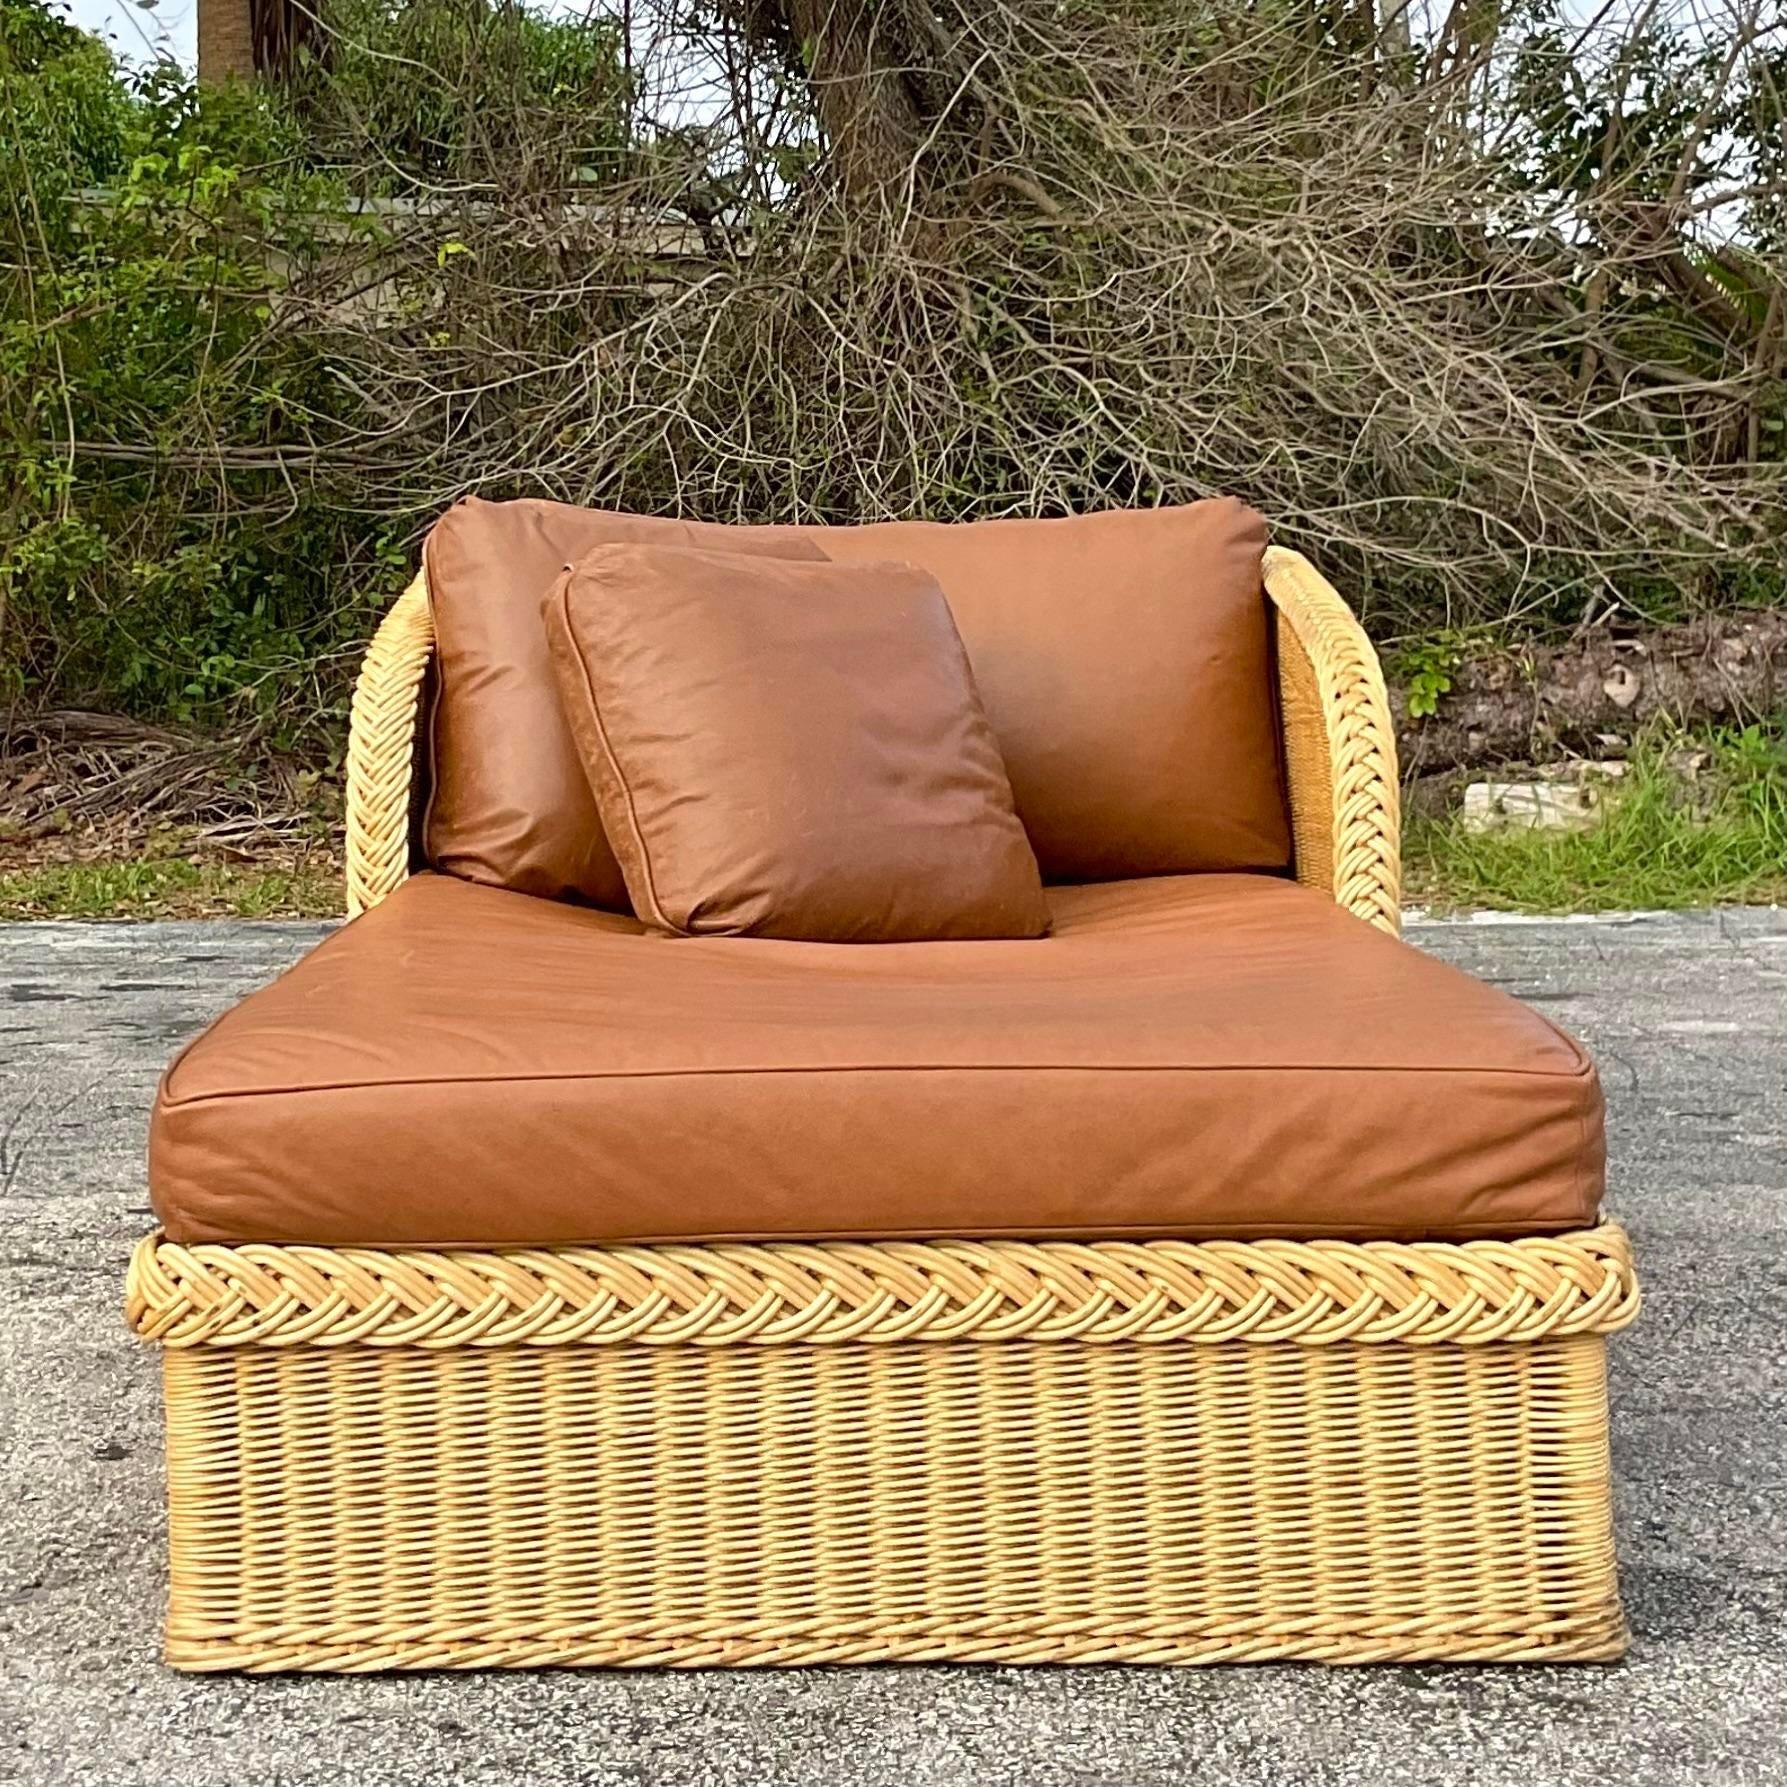 An incredible vintage Coastal chaise lounge. Made by the iconic Bielecky Brothers and tagged below the cushion. A fantastic custom leather cushion with coordinating throw pillows. Acquired from a Palm Beach estate. 